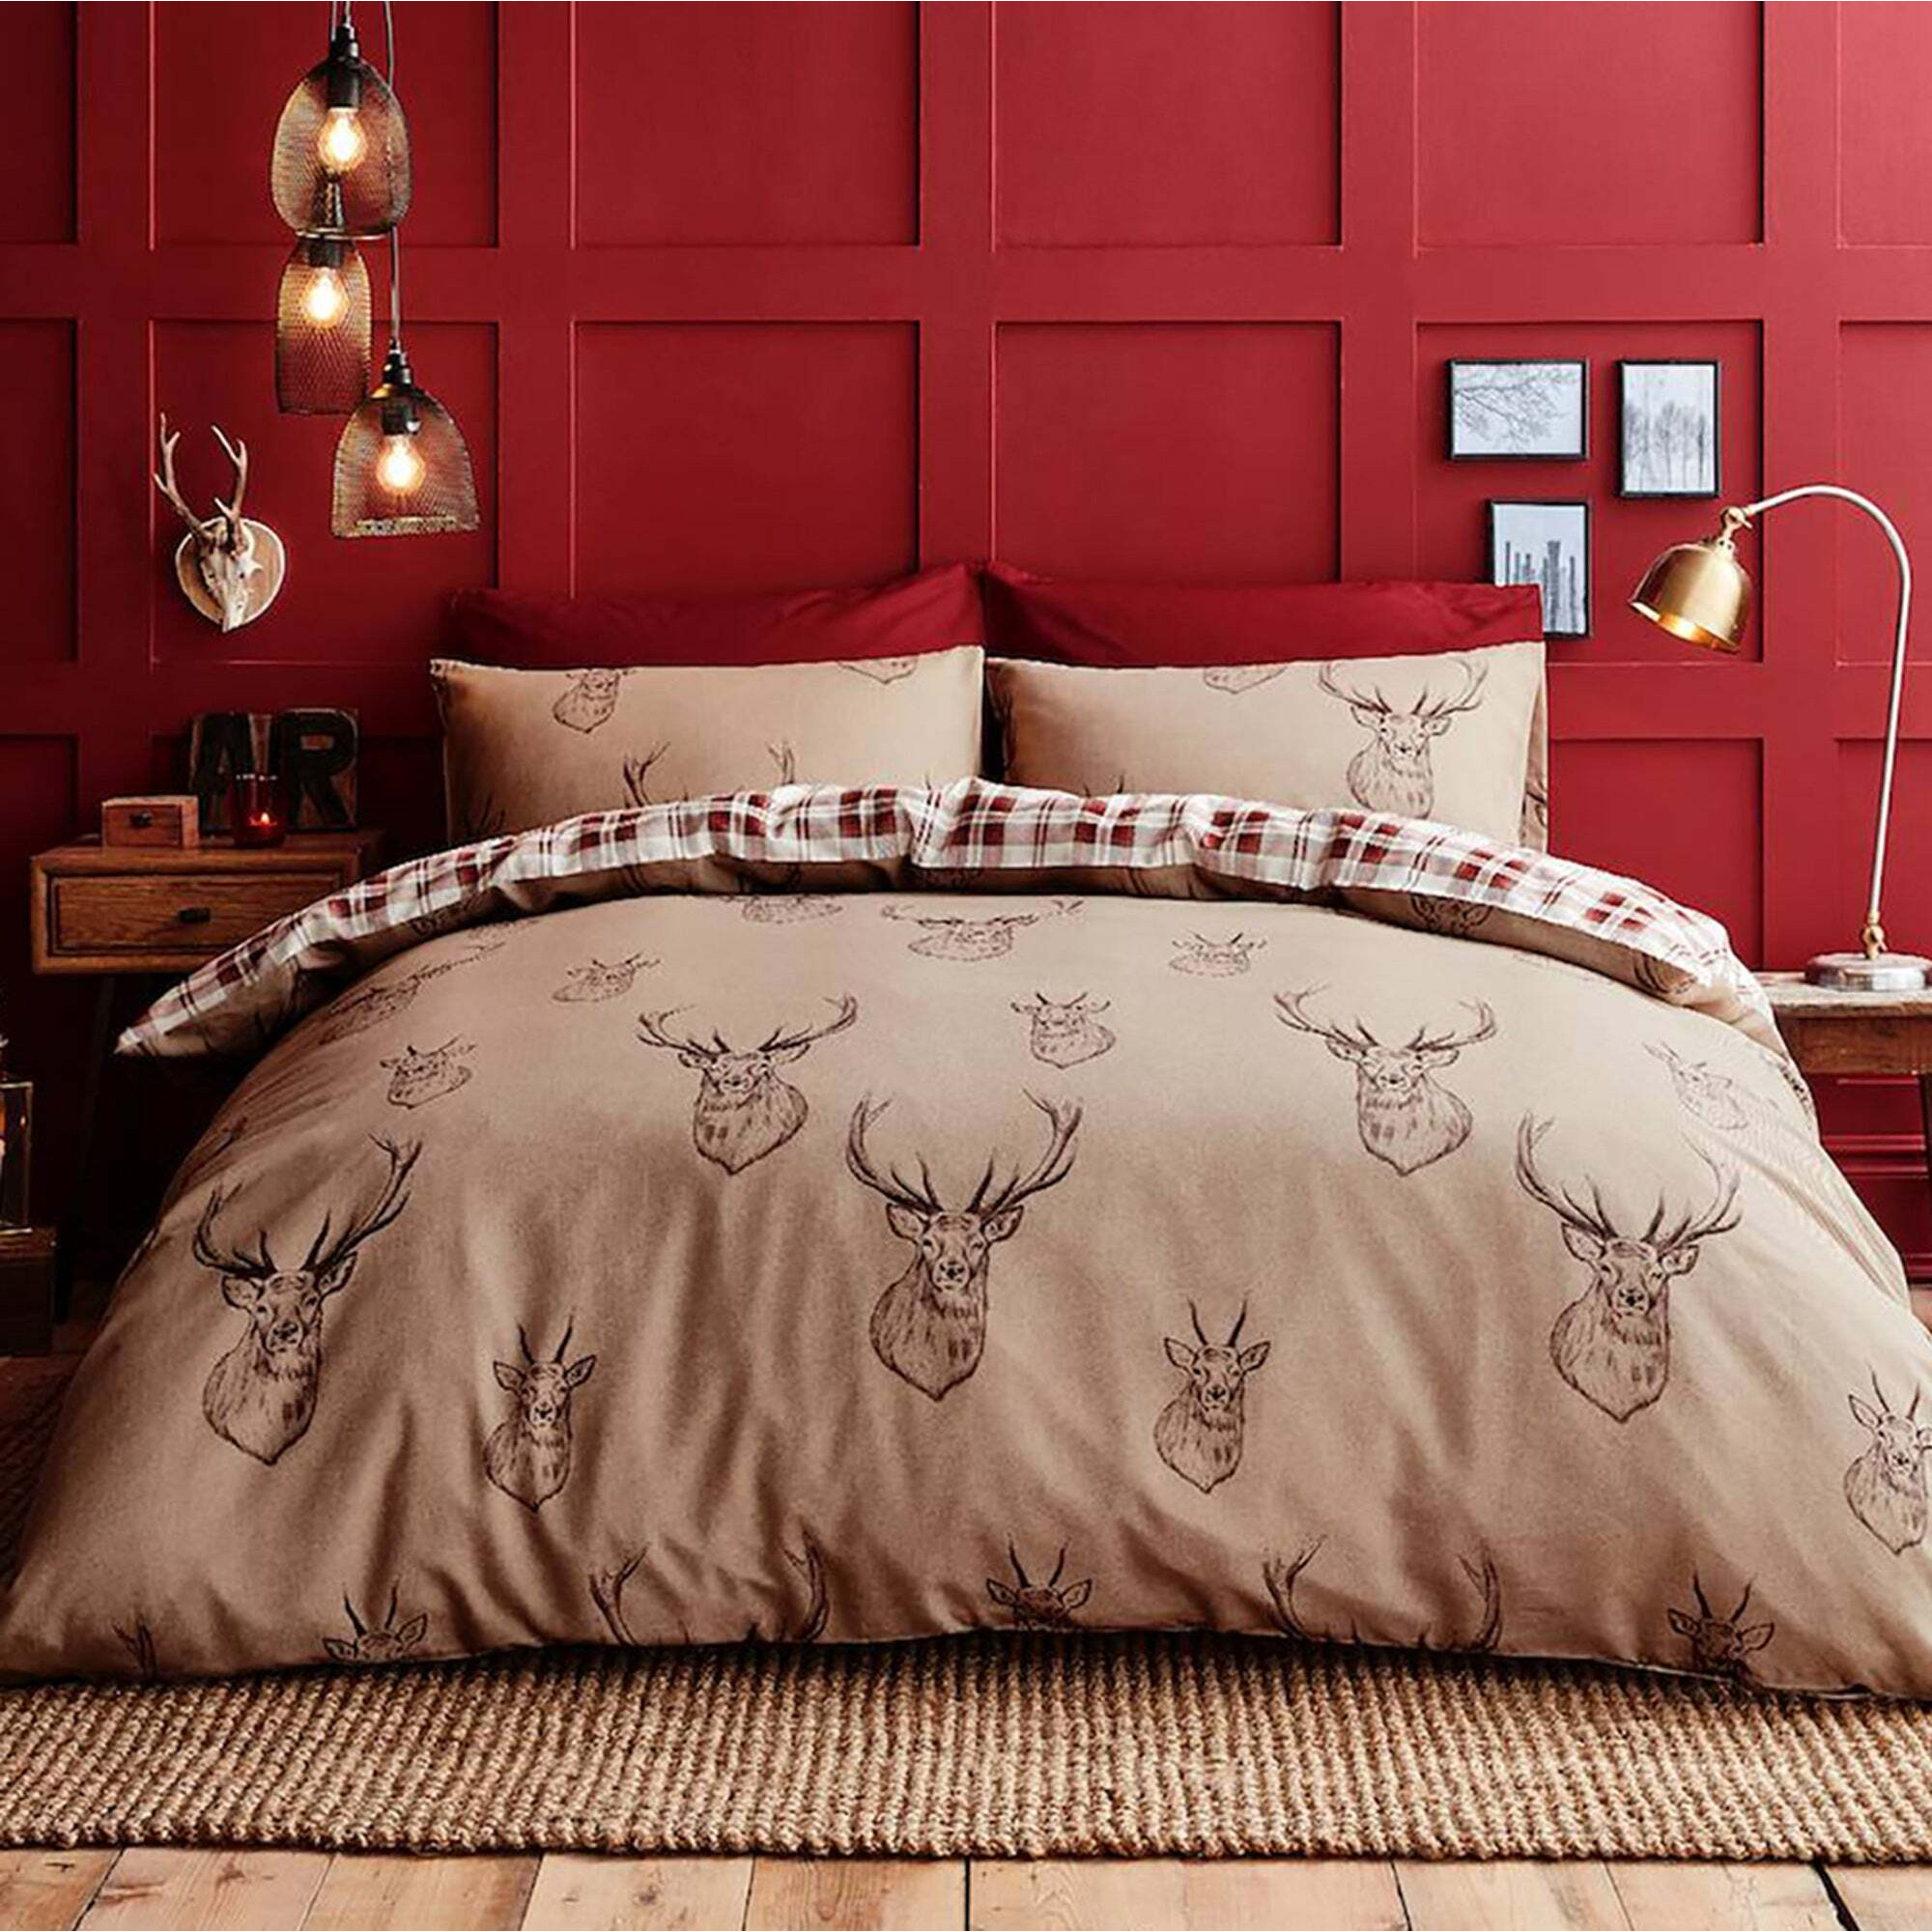 Catherine Lansfield Stag Natural Duvet Cover and Pillowcase Set Beige/Red